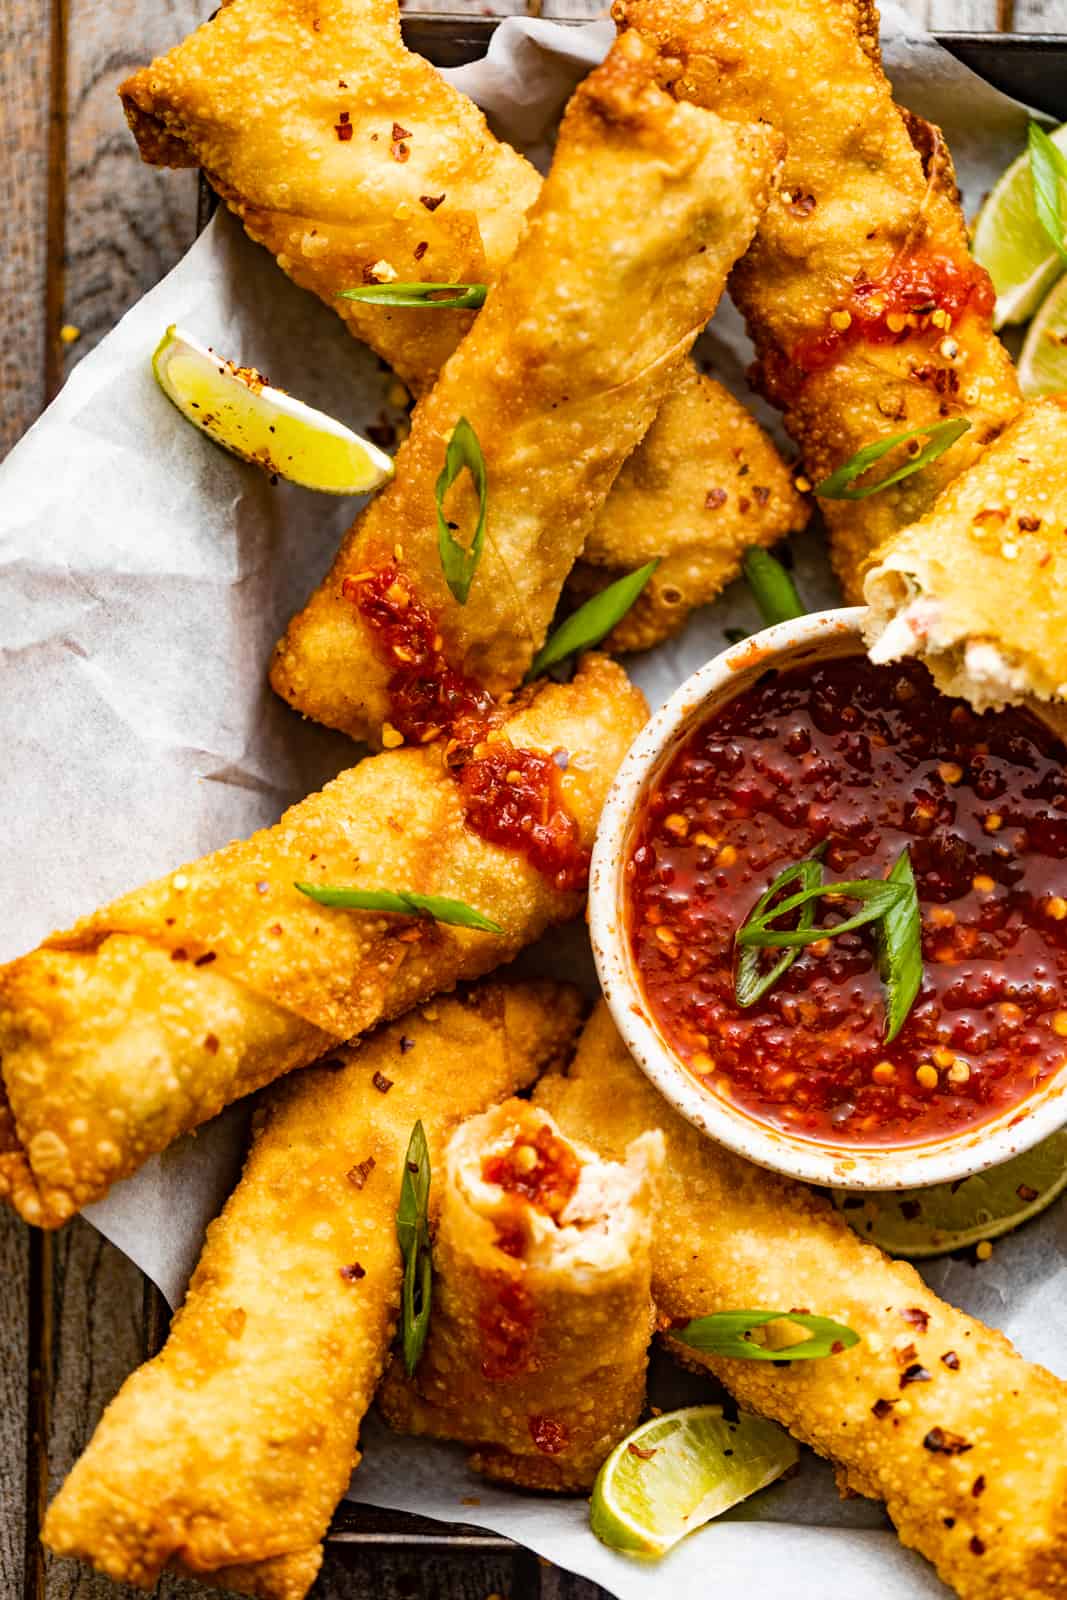 crab rangoon egg rolls in a basket with a bowl of sweet and sour dipping sauce.